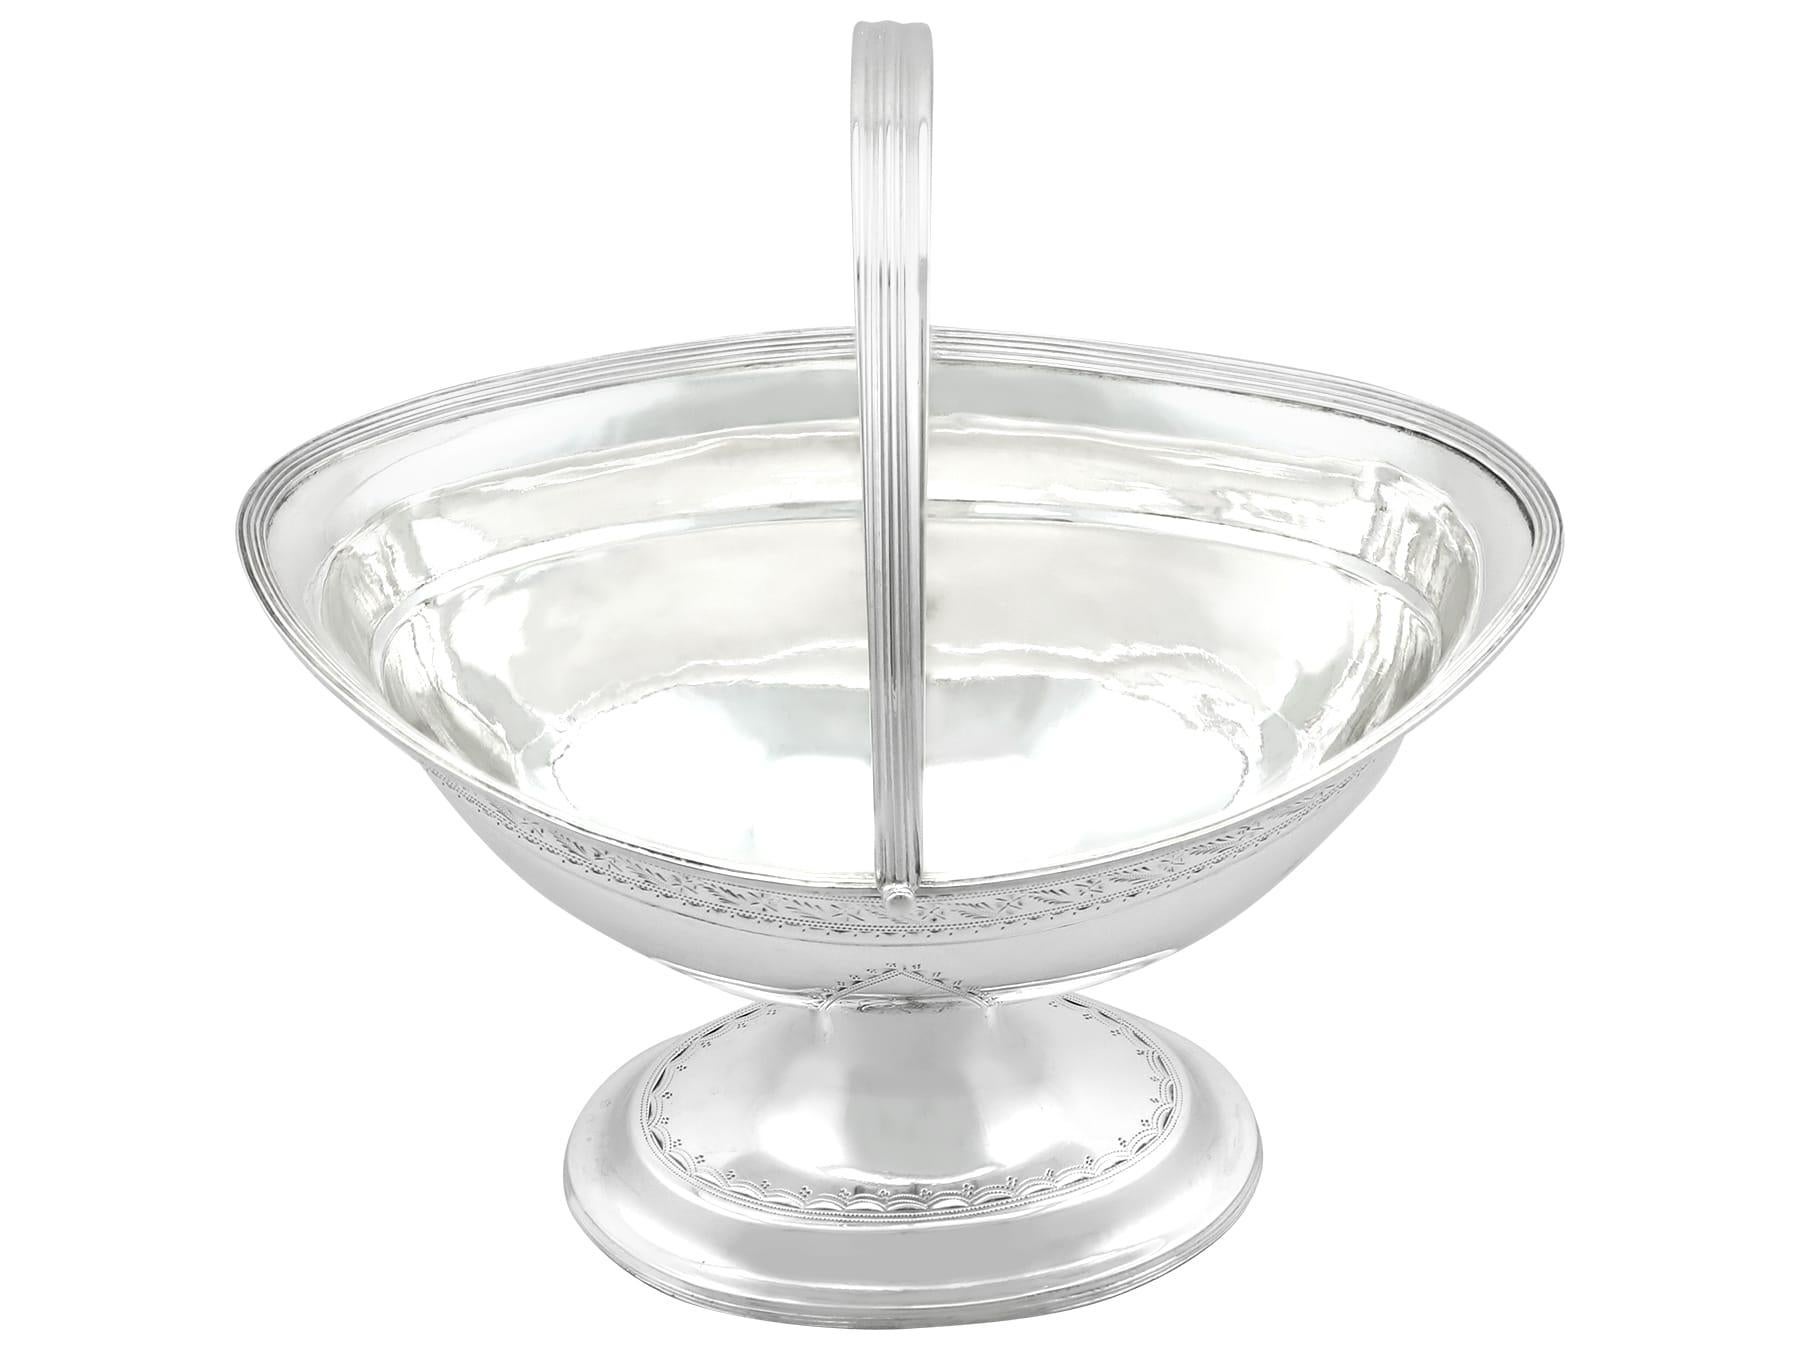 An exceptional, fine and impressive antique George III Irish sterling silver sugar basket; an addition to our Georgian silverware collection.

This exceptional antique George III Irish sterling silver sugar/bon bon basket has a plain oval rounded